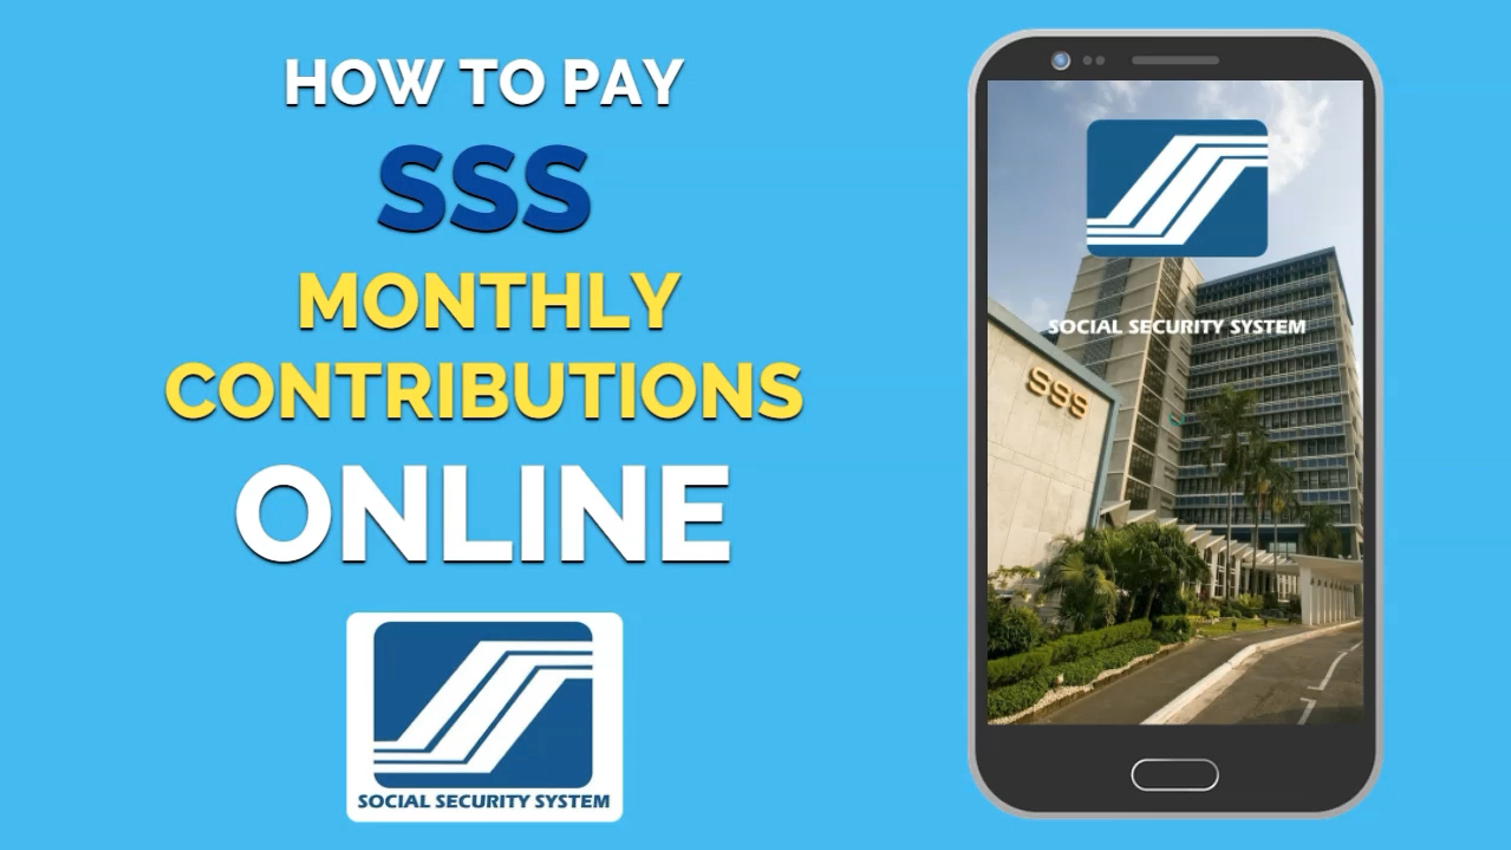 How to Pay SSS Monthly Contributions Online? (for Voluntary an OFW)